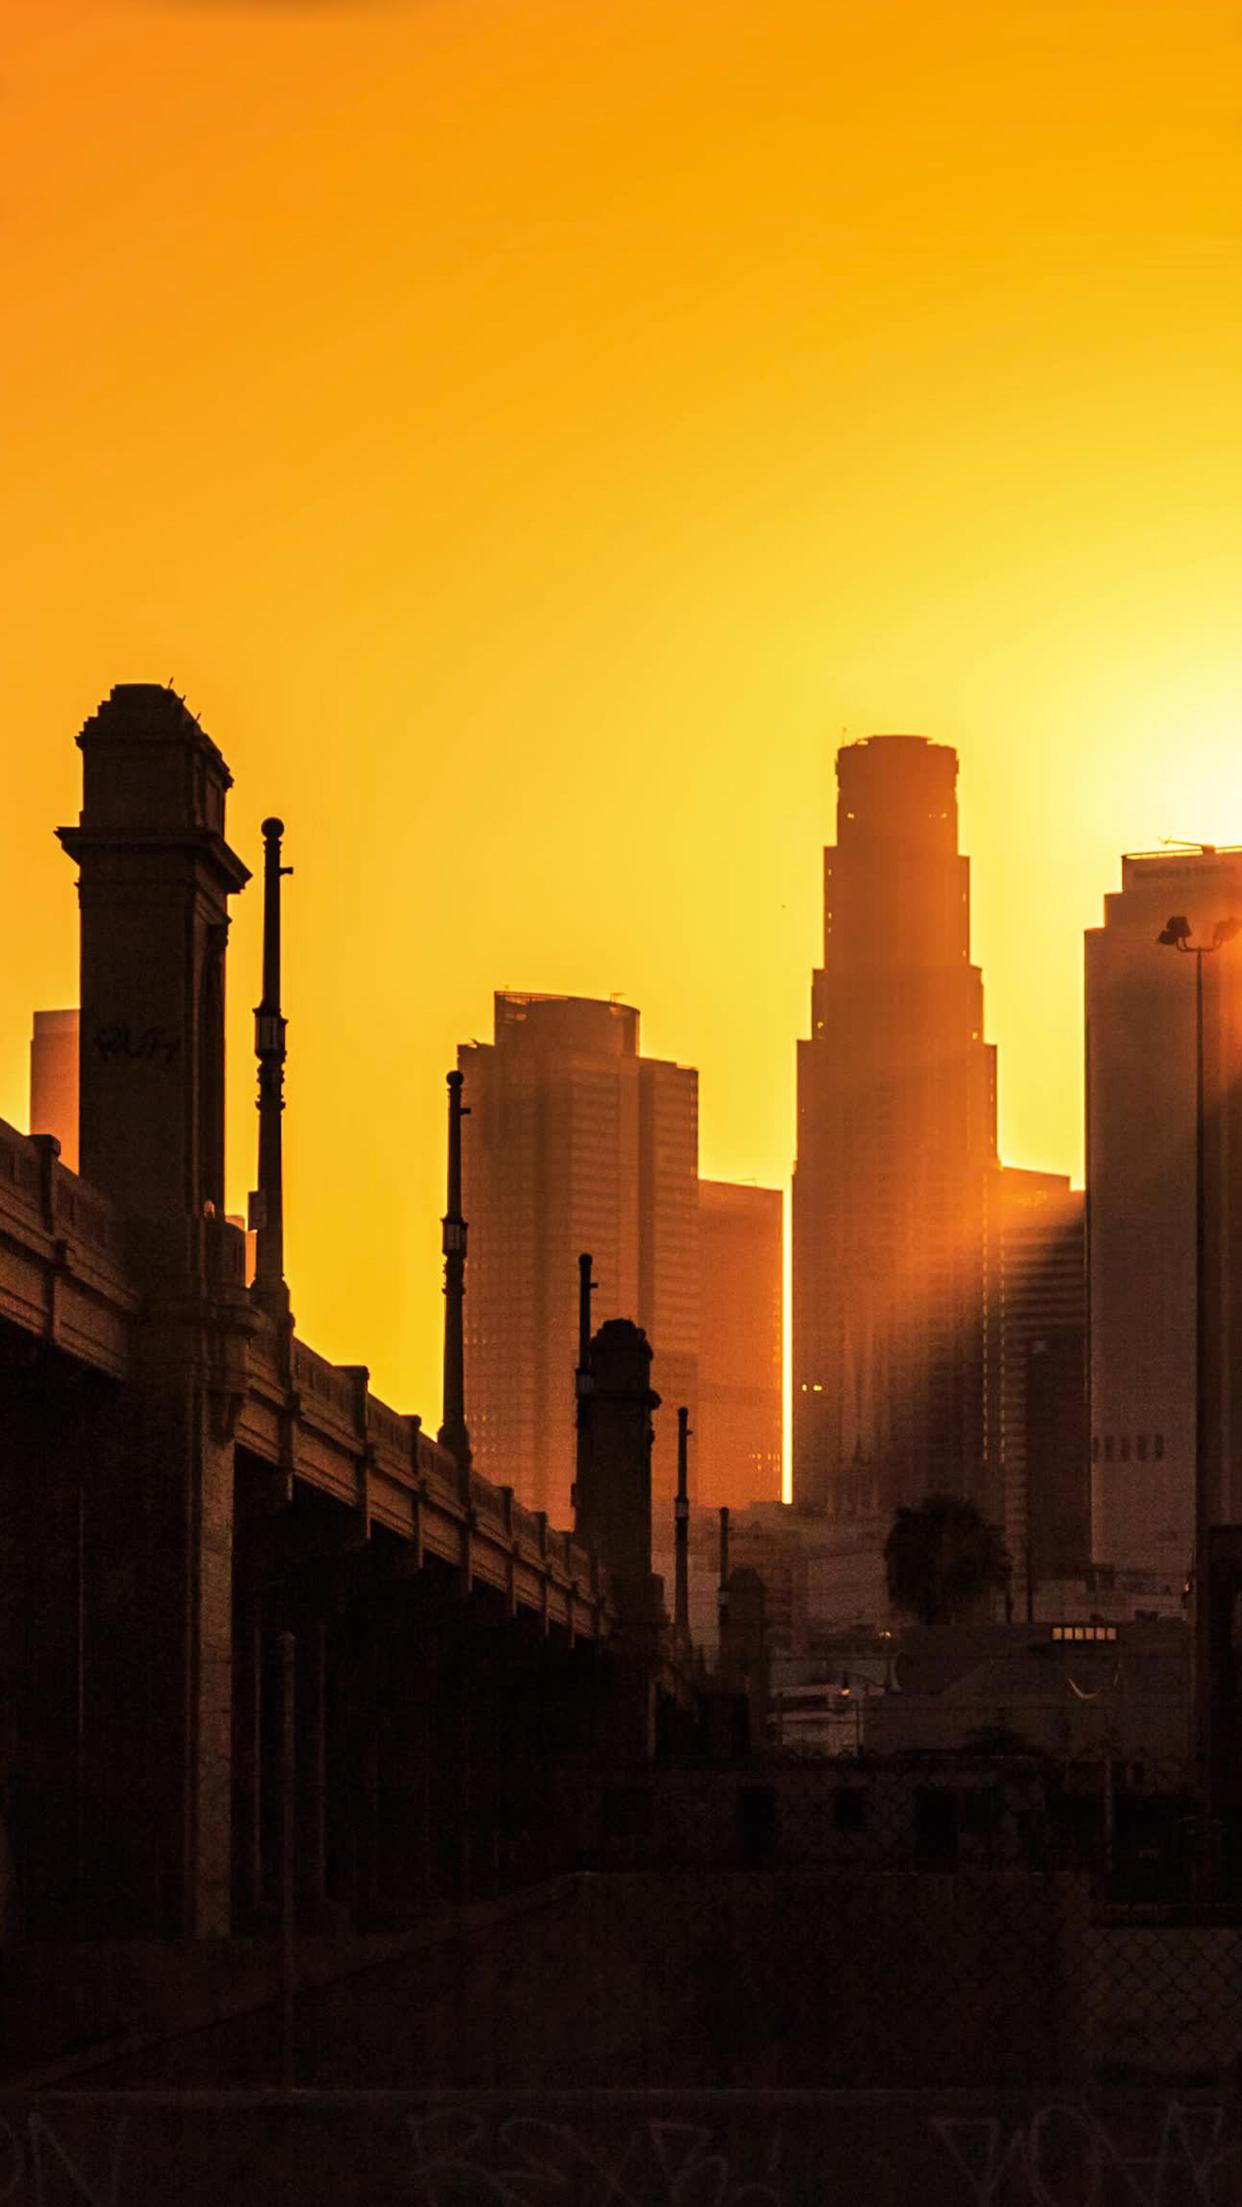 Los Angeles City Sunset Wallpaper For iPhone Pro Max X